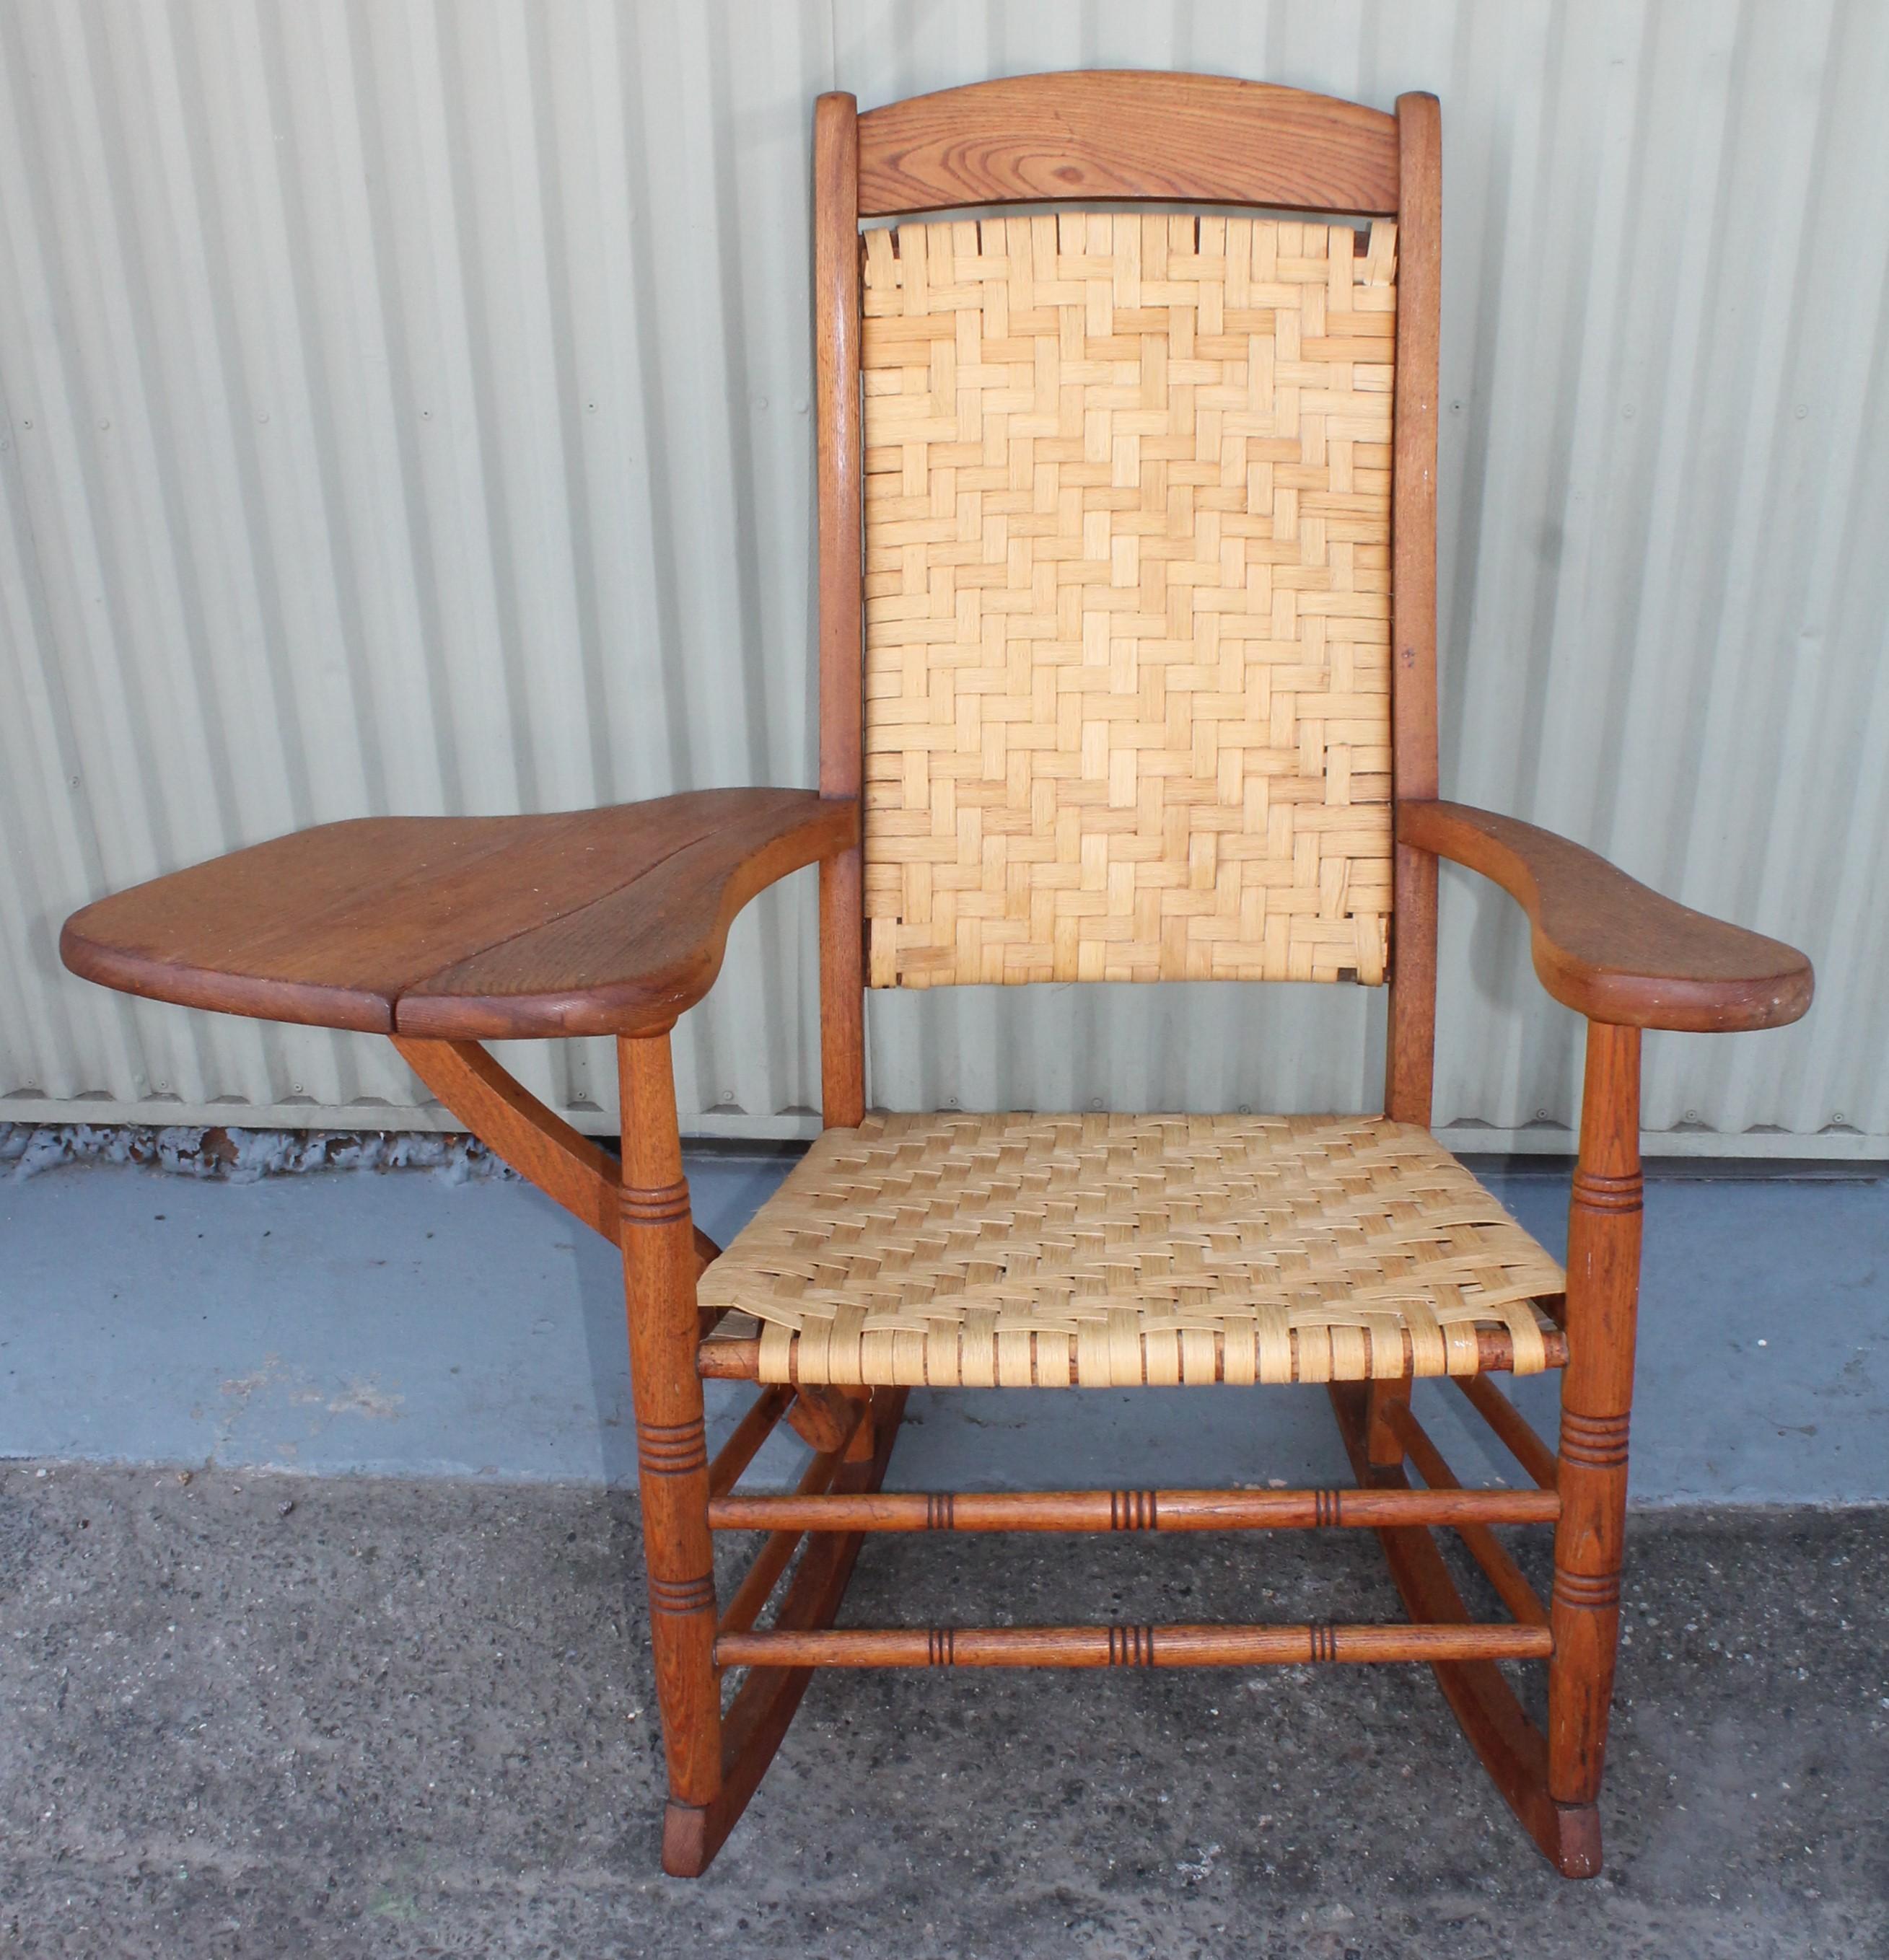 This writing arm rocking chair is from a log cabins front porch and is super comfortable. It is newly re-woven slat seat and backing. This is such great rare form. It is all in old yellow oak. Great inside or out of your country rustic